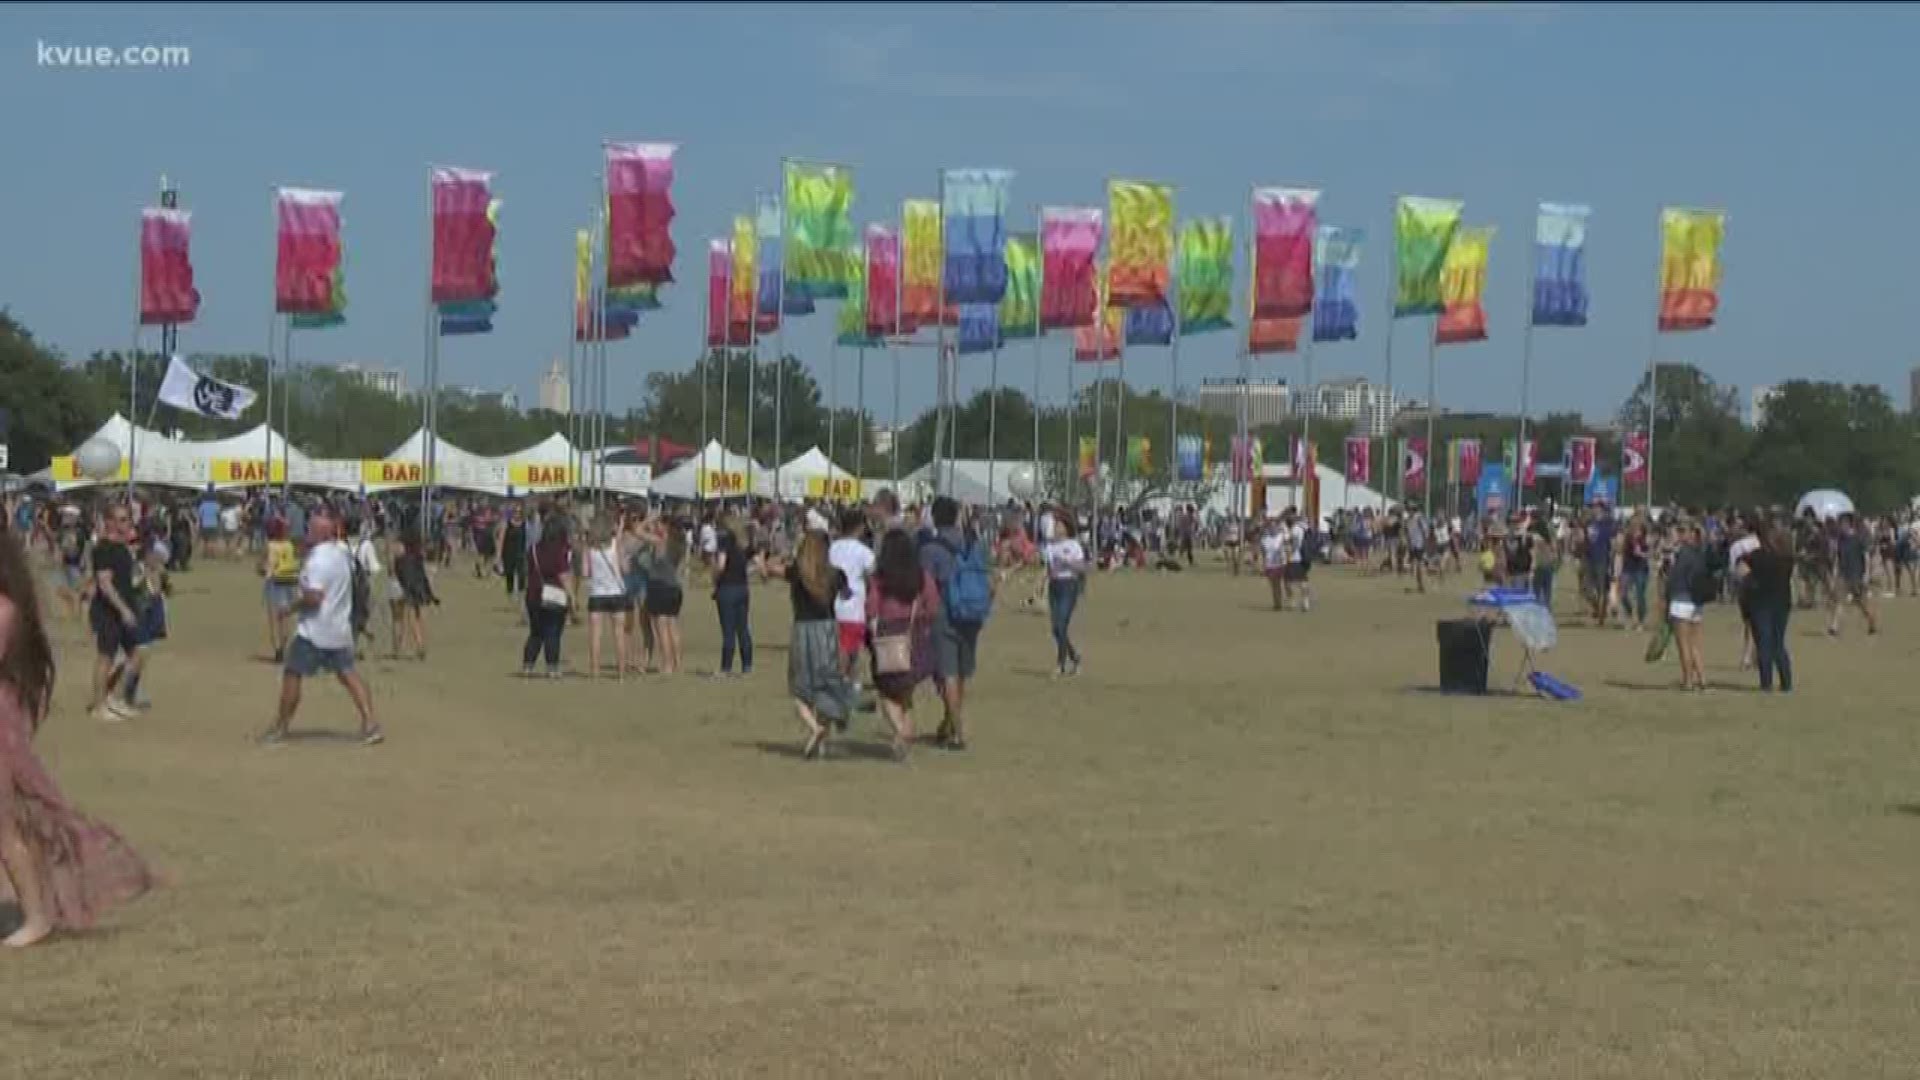 There's going to be a heavy police presence both inside and outside the festival grounds.